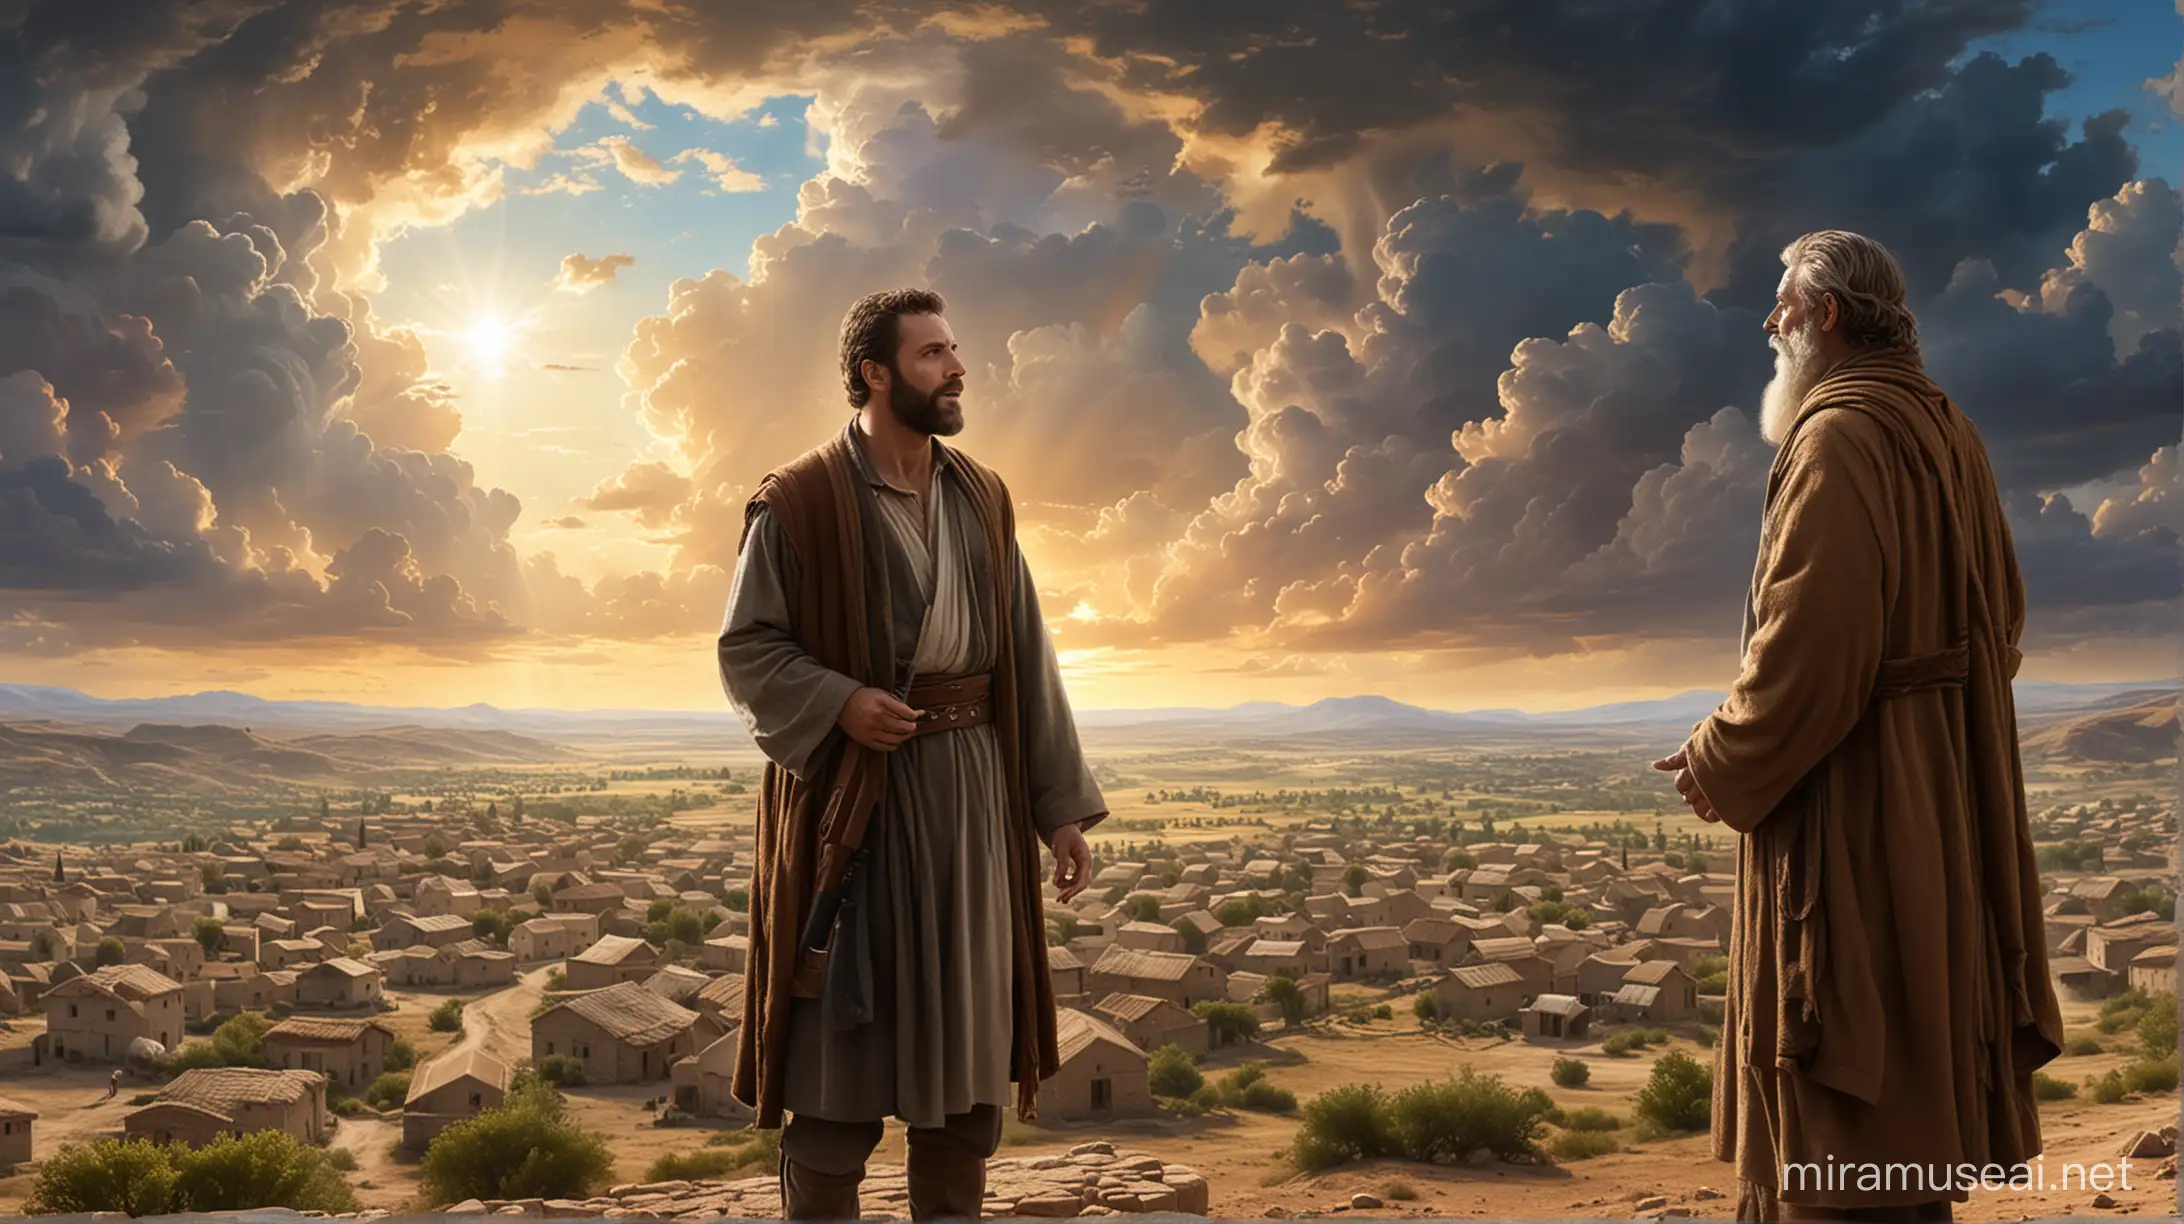 Abraham speaking with Godly looking man, a big village in the distance, and a magnificent sky